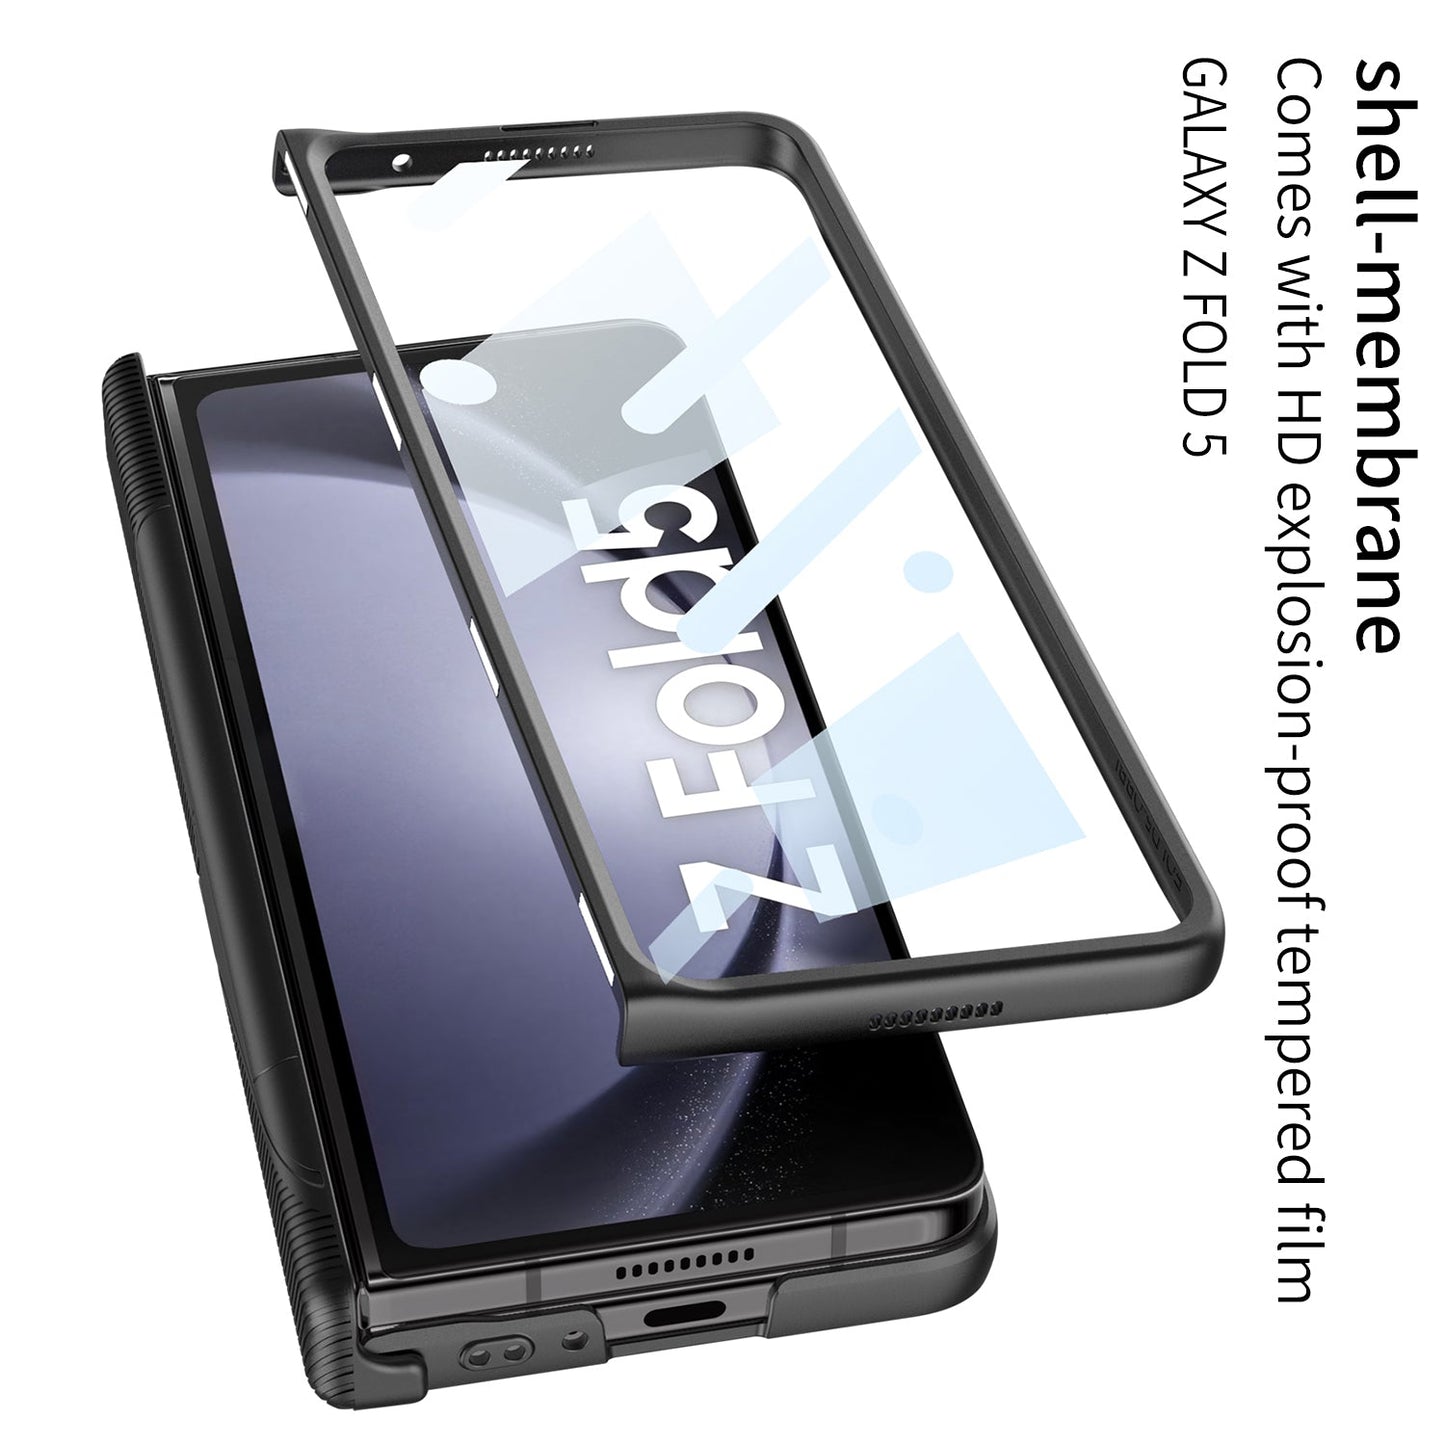 Magnetic Armor All-included Hinge Holder Case With Back Screen Protector For Samsung Galaxy Z Fold5 Fold4 Fold3